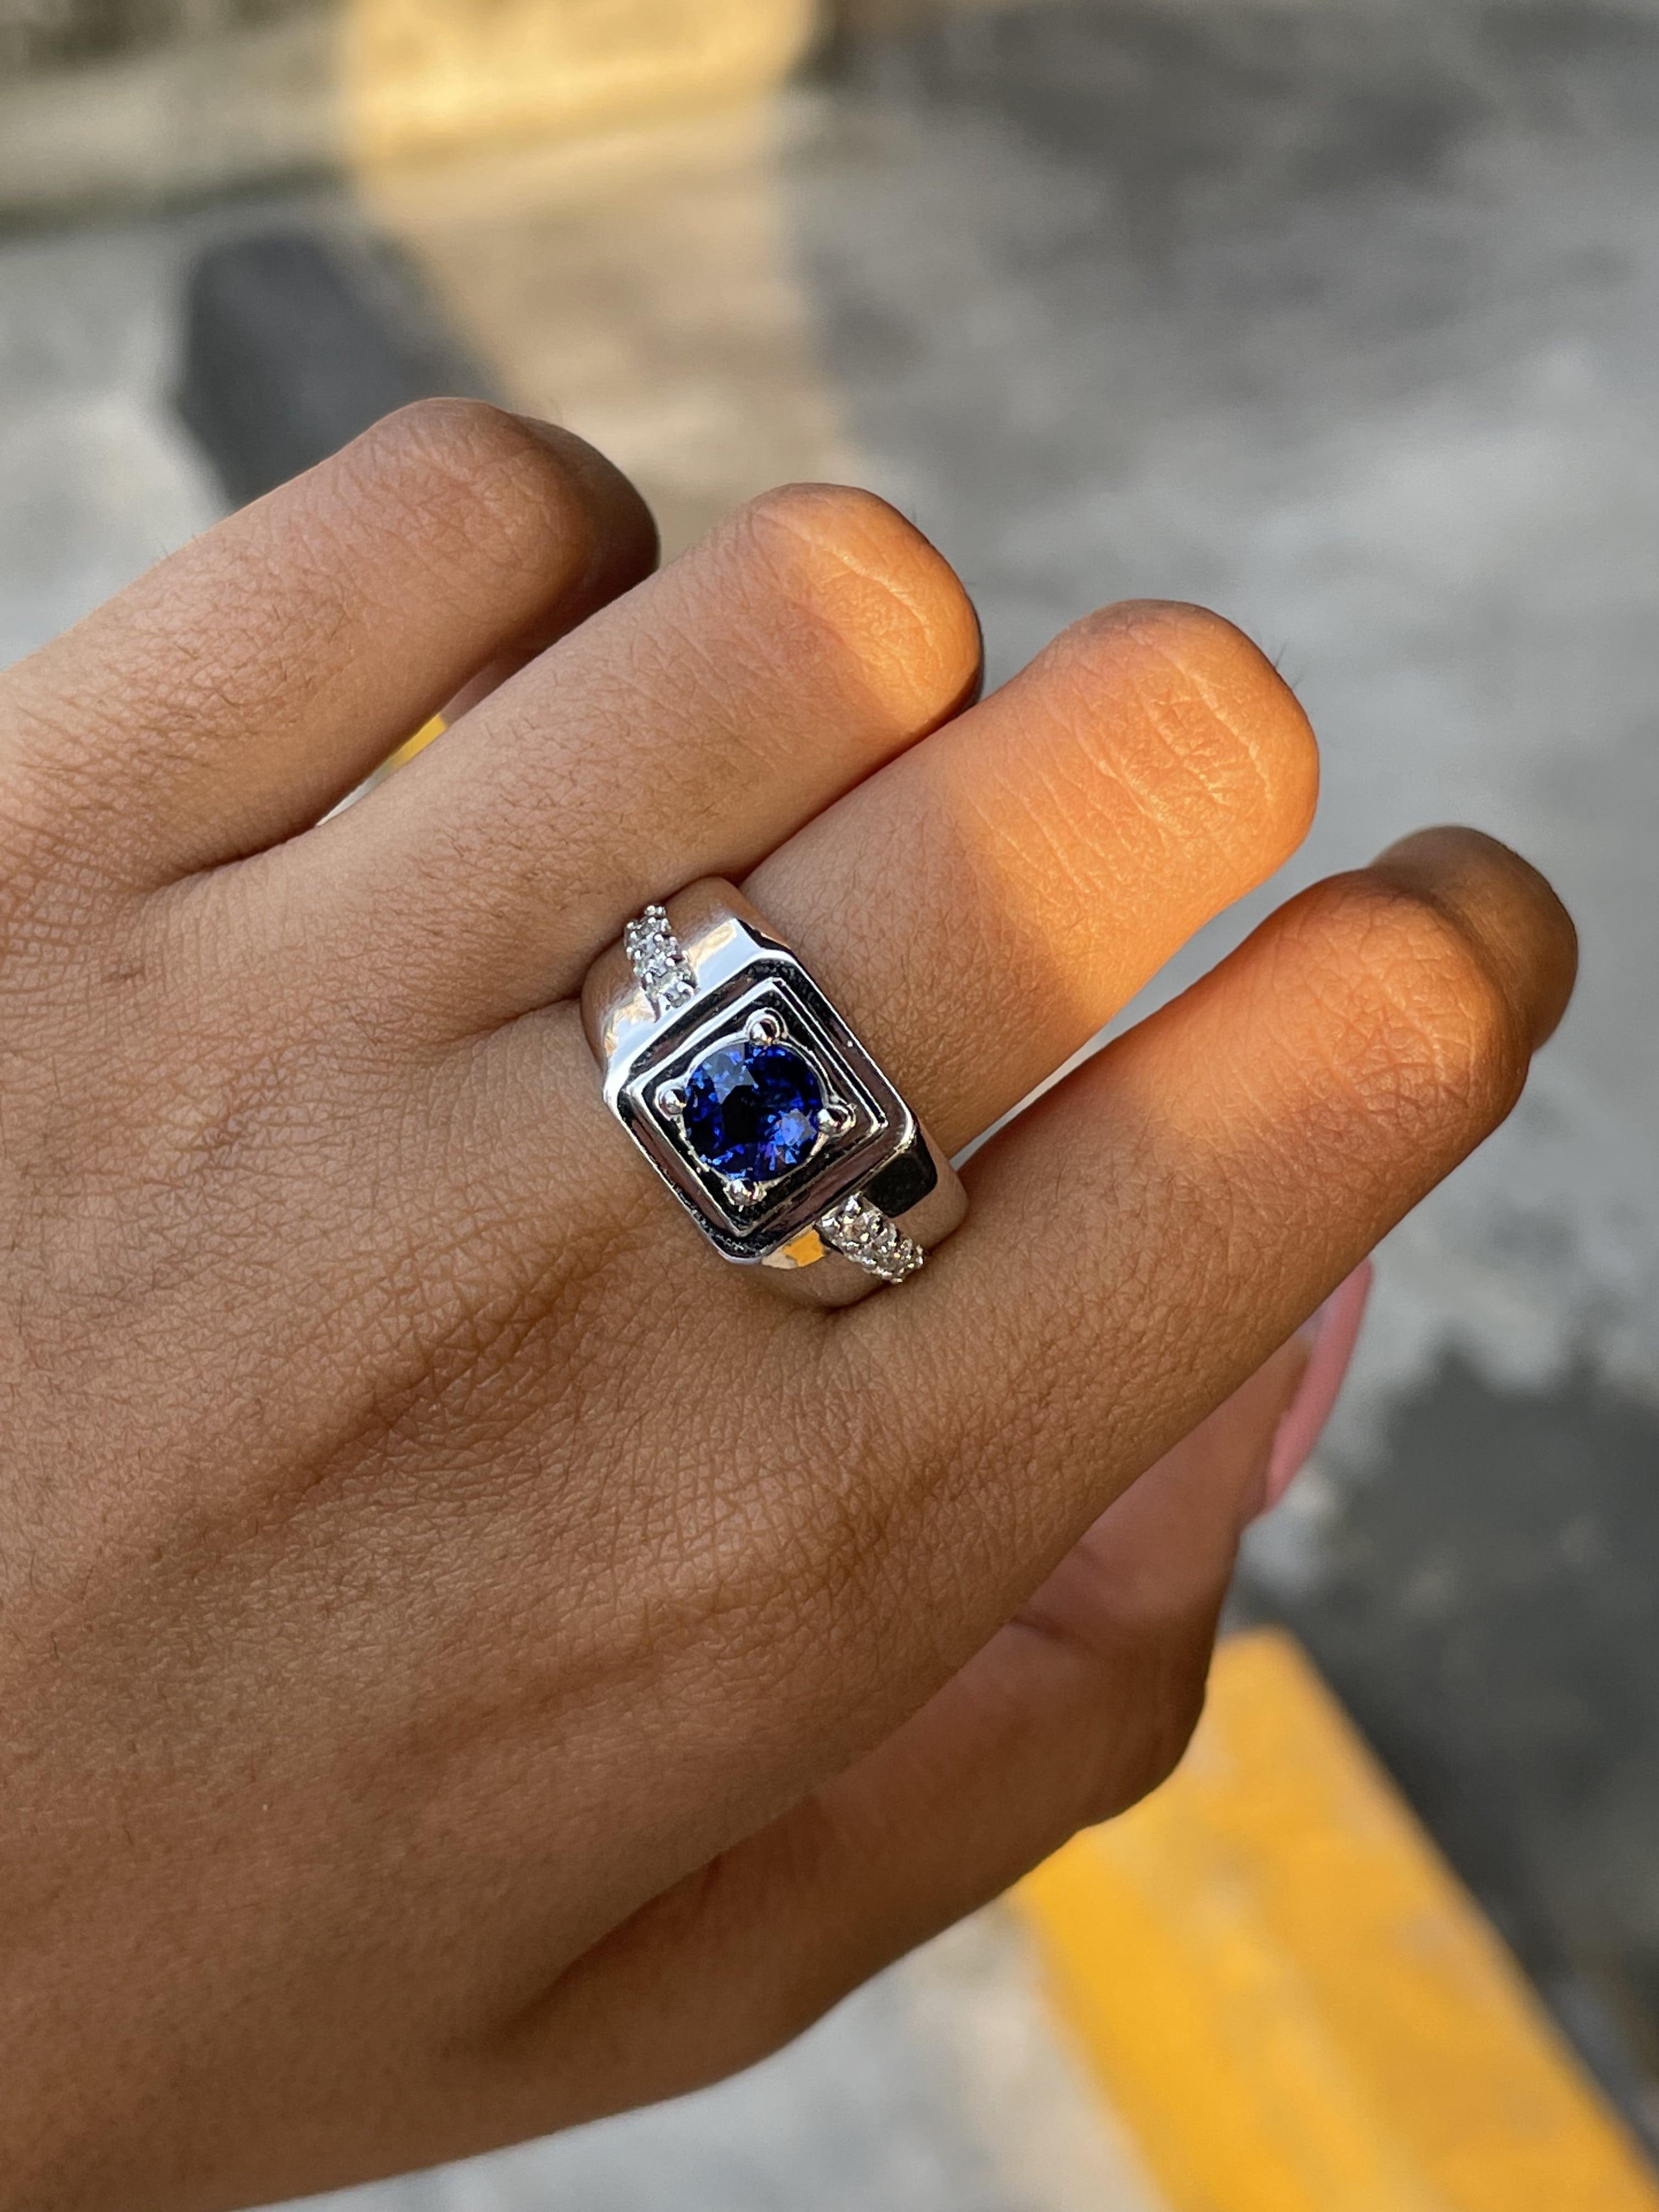 Presenting a lustrous, gemstone ring for men,  that will win over anyone’s heart with its sheer beauty and sophistication. This stunning piece showcases a majestic, round-cut Sapphire as its centerpiece, radiating a breathtaking luster and boasting